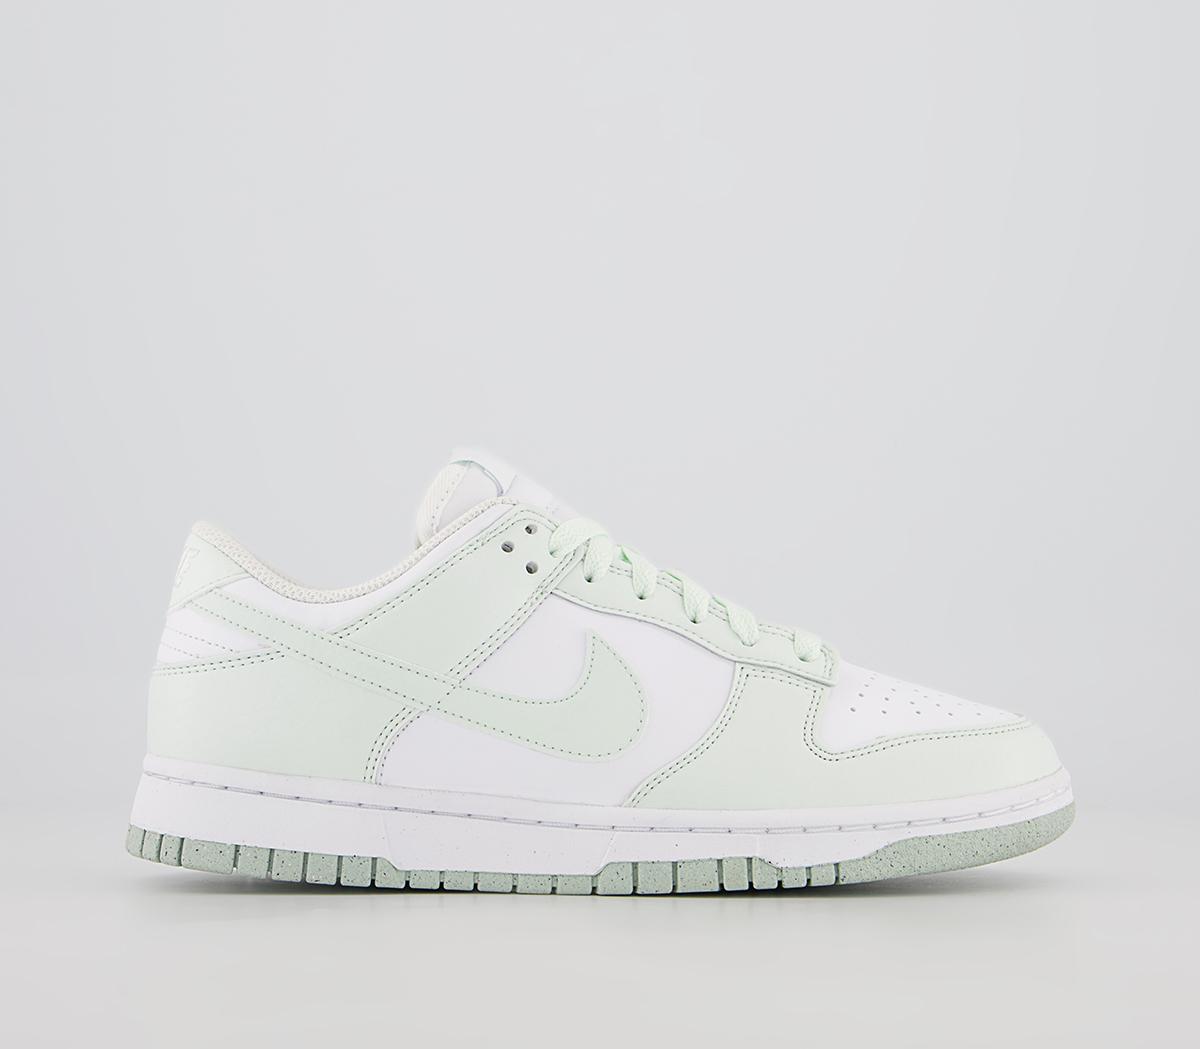 Nike Dunk Low Trainers White Barely Green Nike Dunk